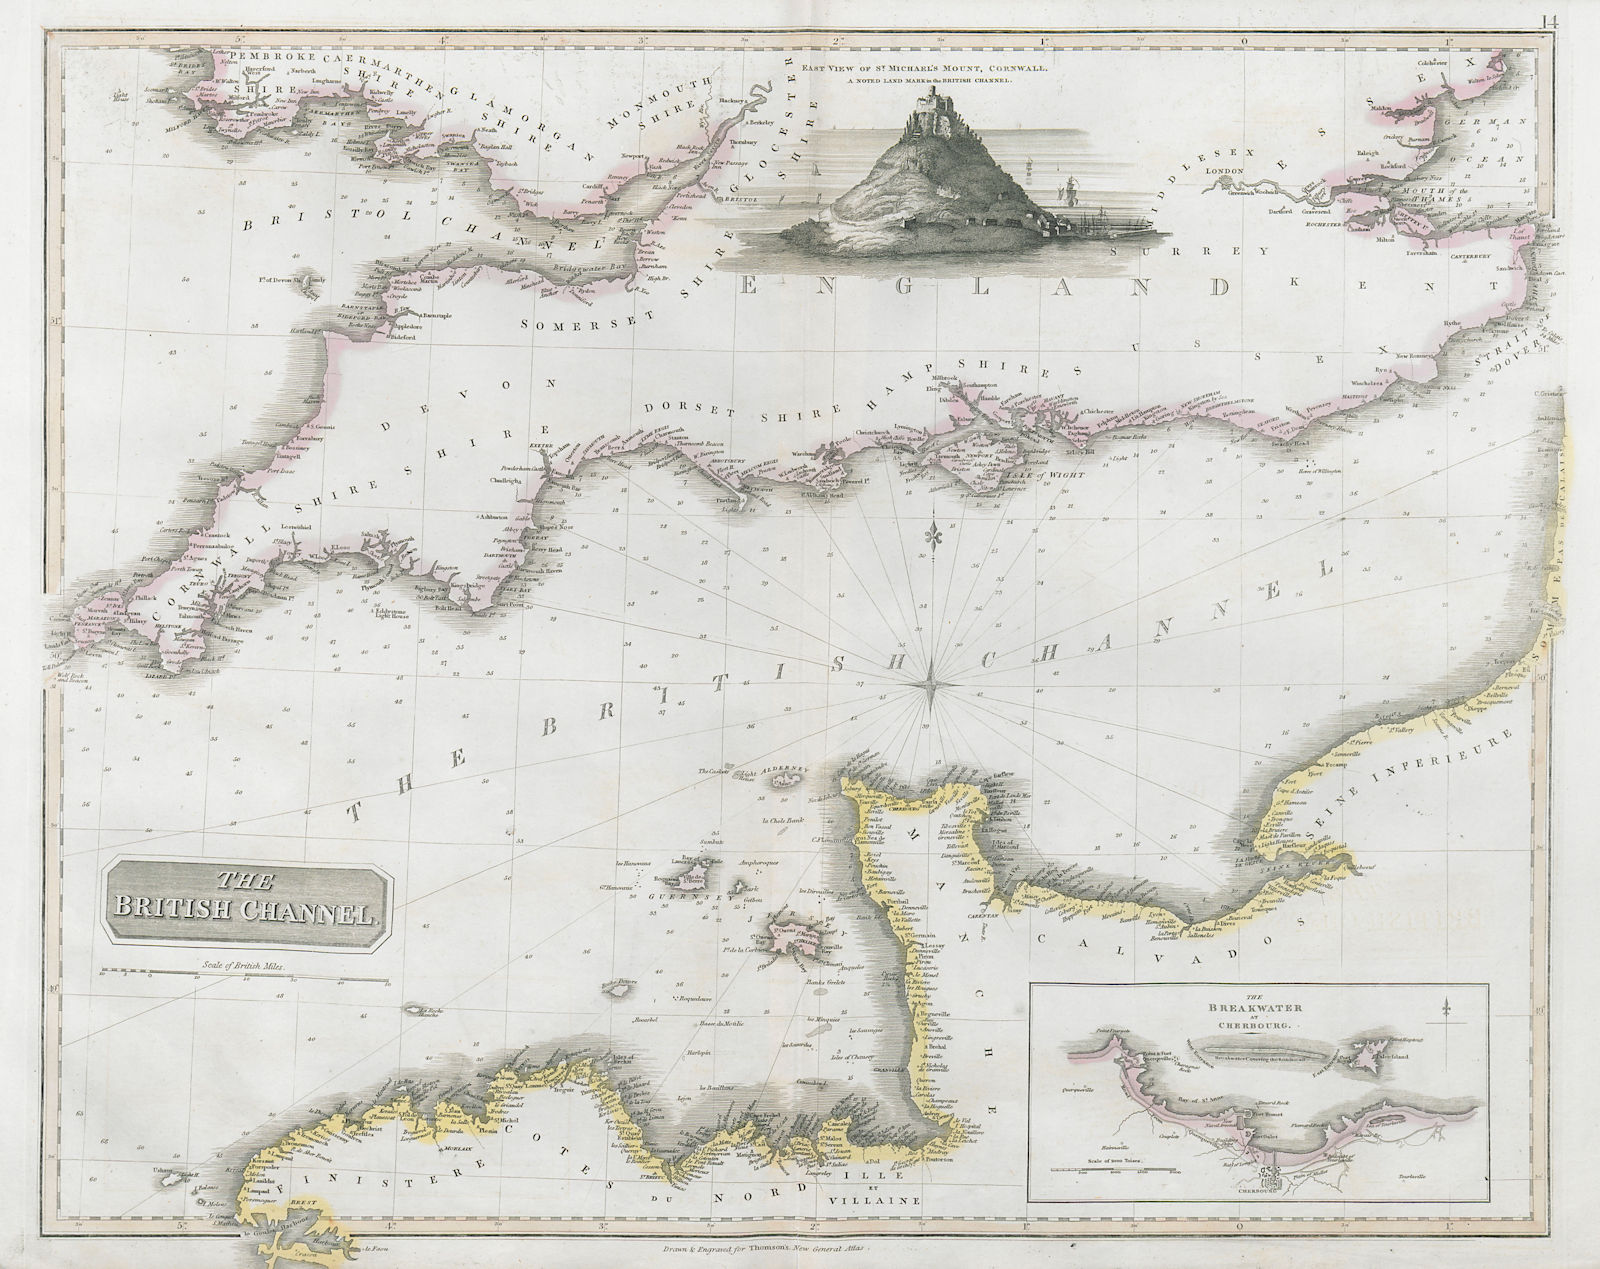 Associate Product "The British Channel". English Channel. Manche. Cherbourgh. THOMSON 1830 map